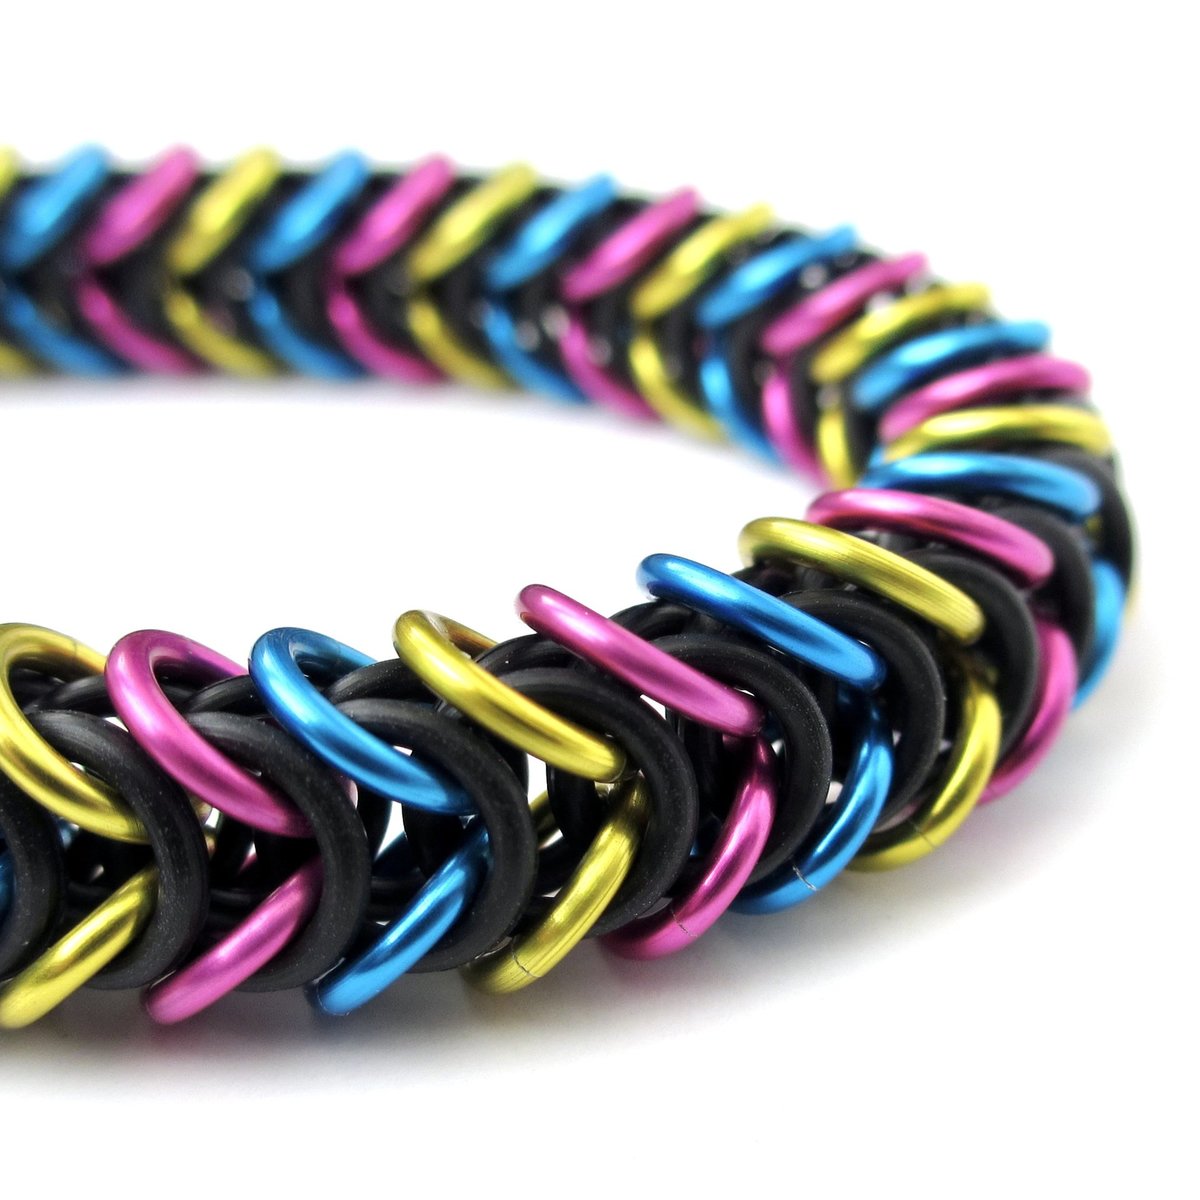 Pansexual pride bracelet, chainmail stretchy box chain